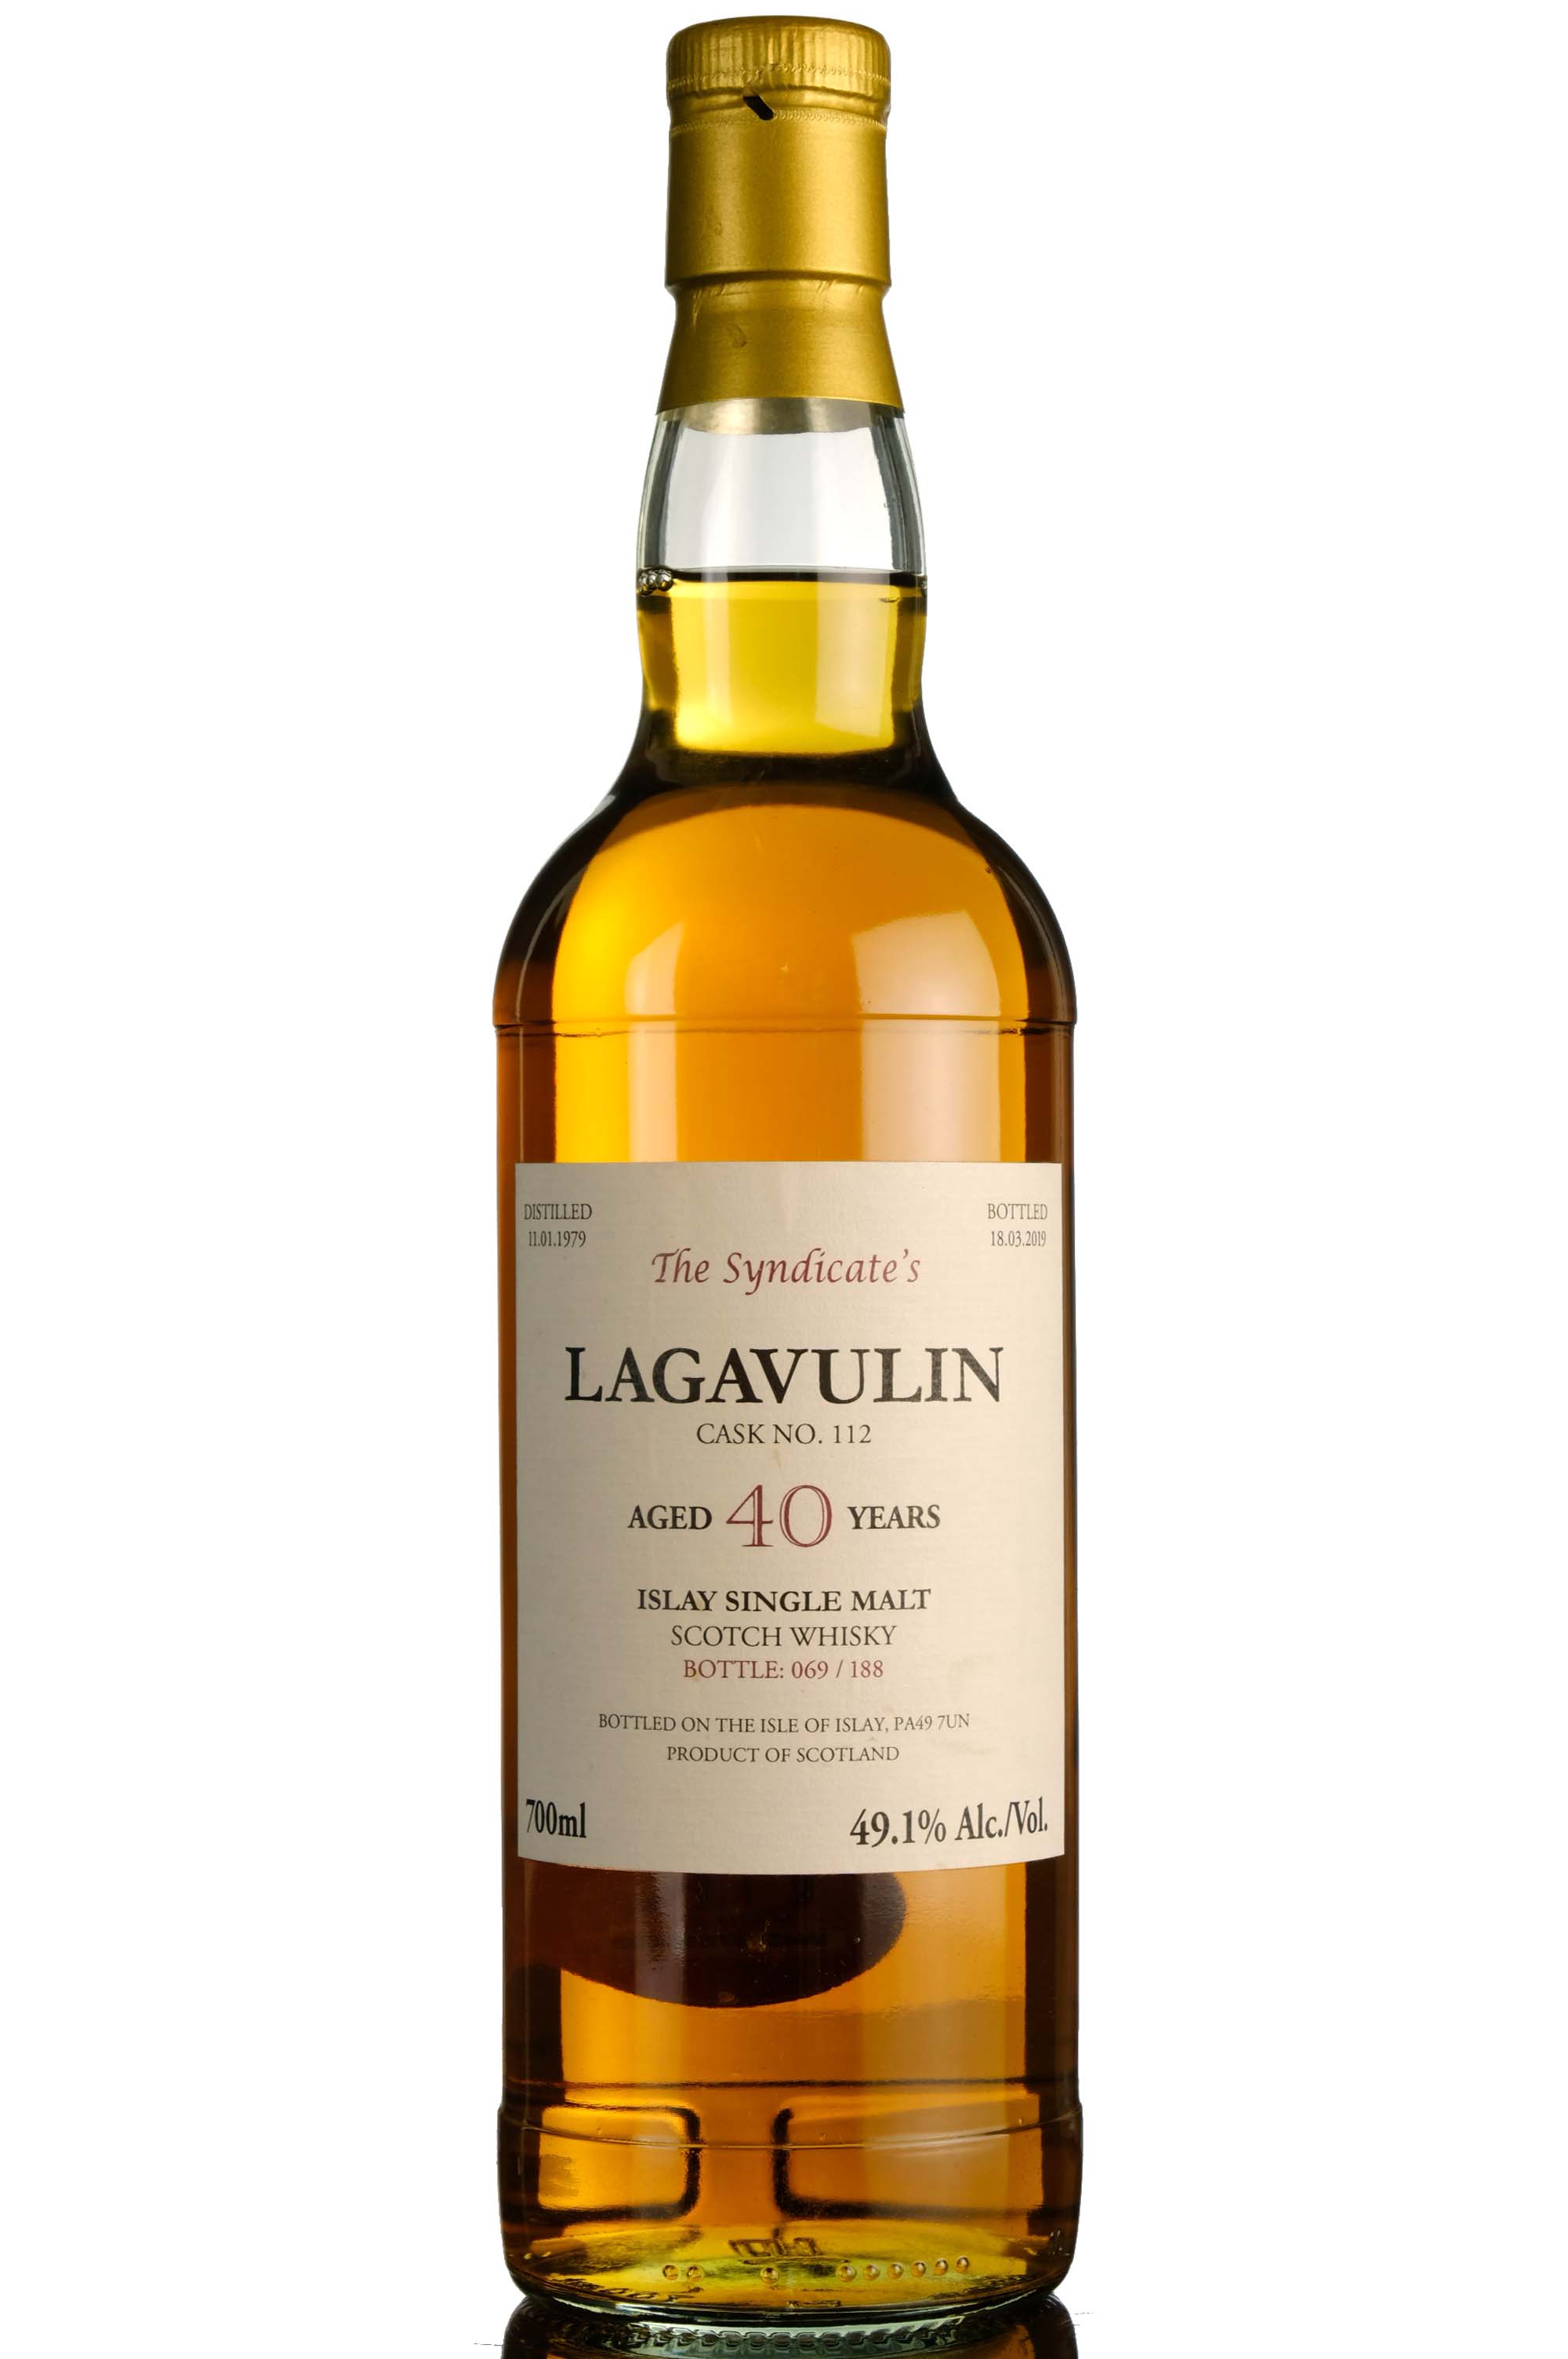 Lagavulin 1979-2019 - 40 Year Old - The Syndicates - Single Cask 112